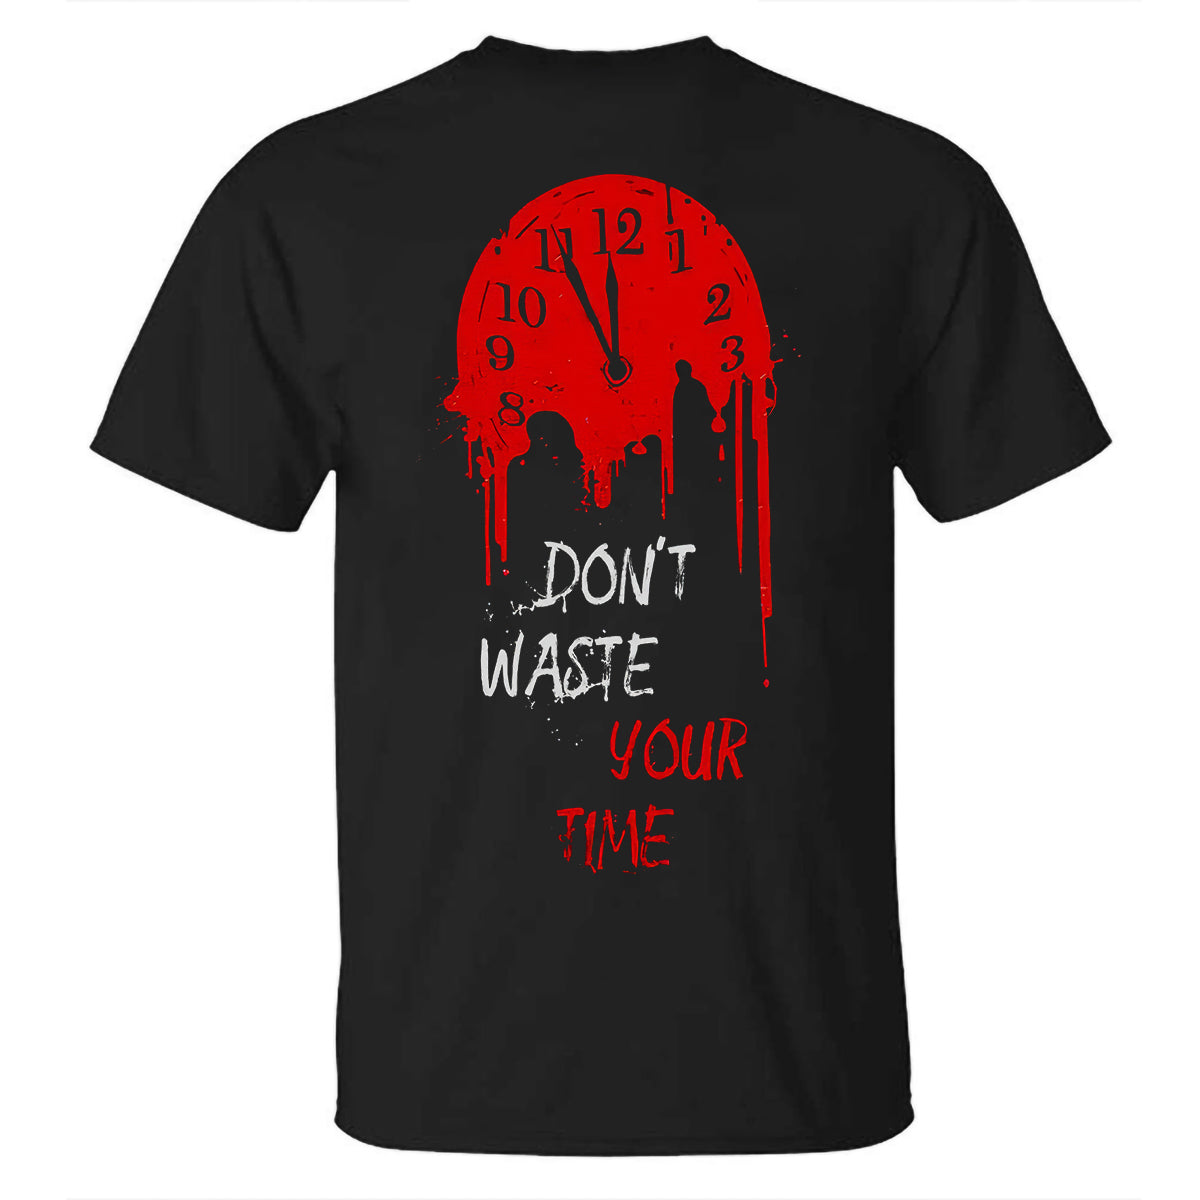 Don't Waste Your Time Printed T-shirt